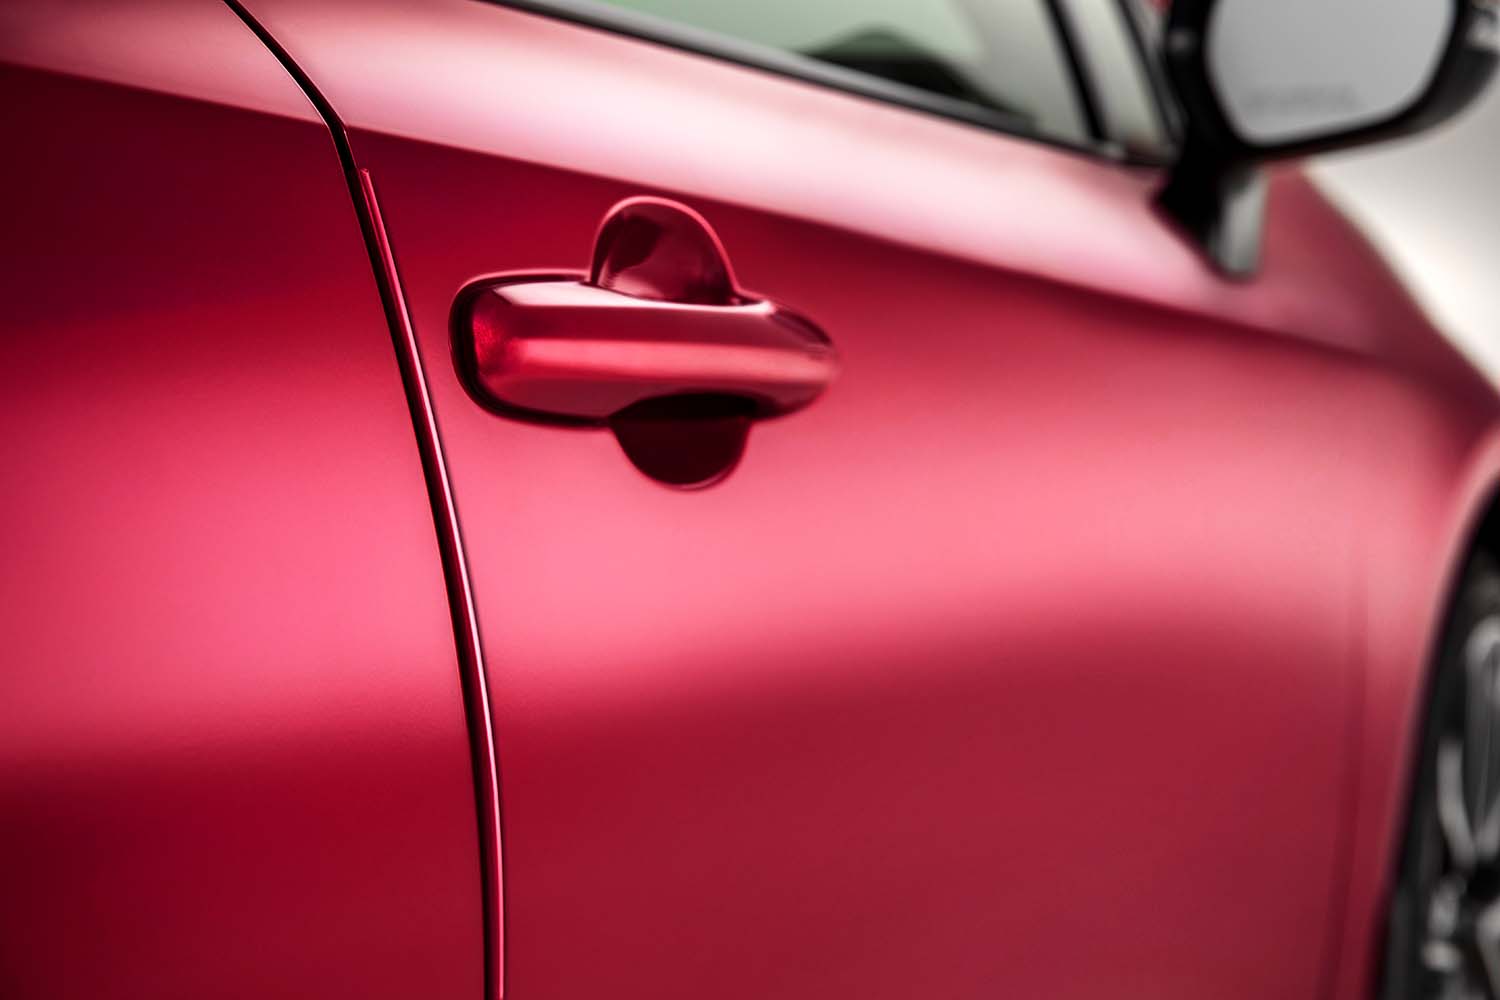 Accessories that help keep your Toyota protected at Bennett Toyota in Allentown, PA | Door edge guards for a Toyota Corolla